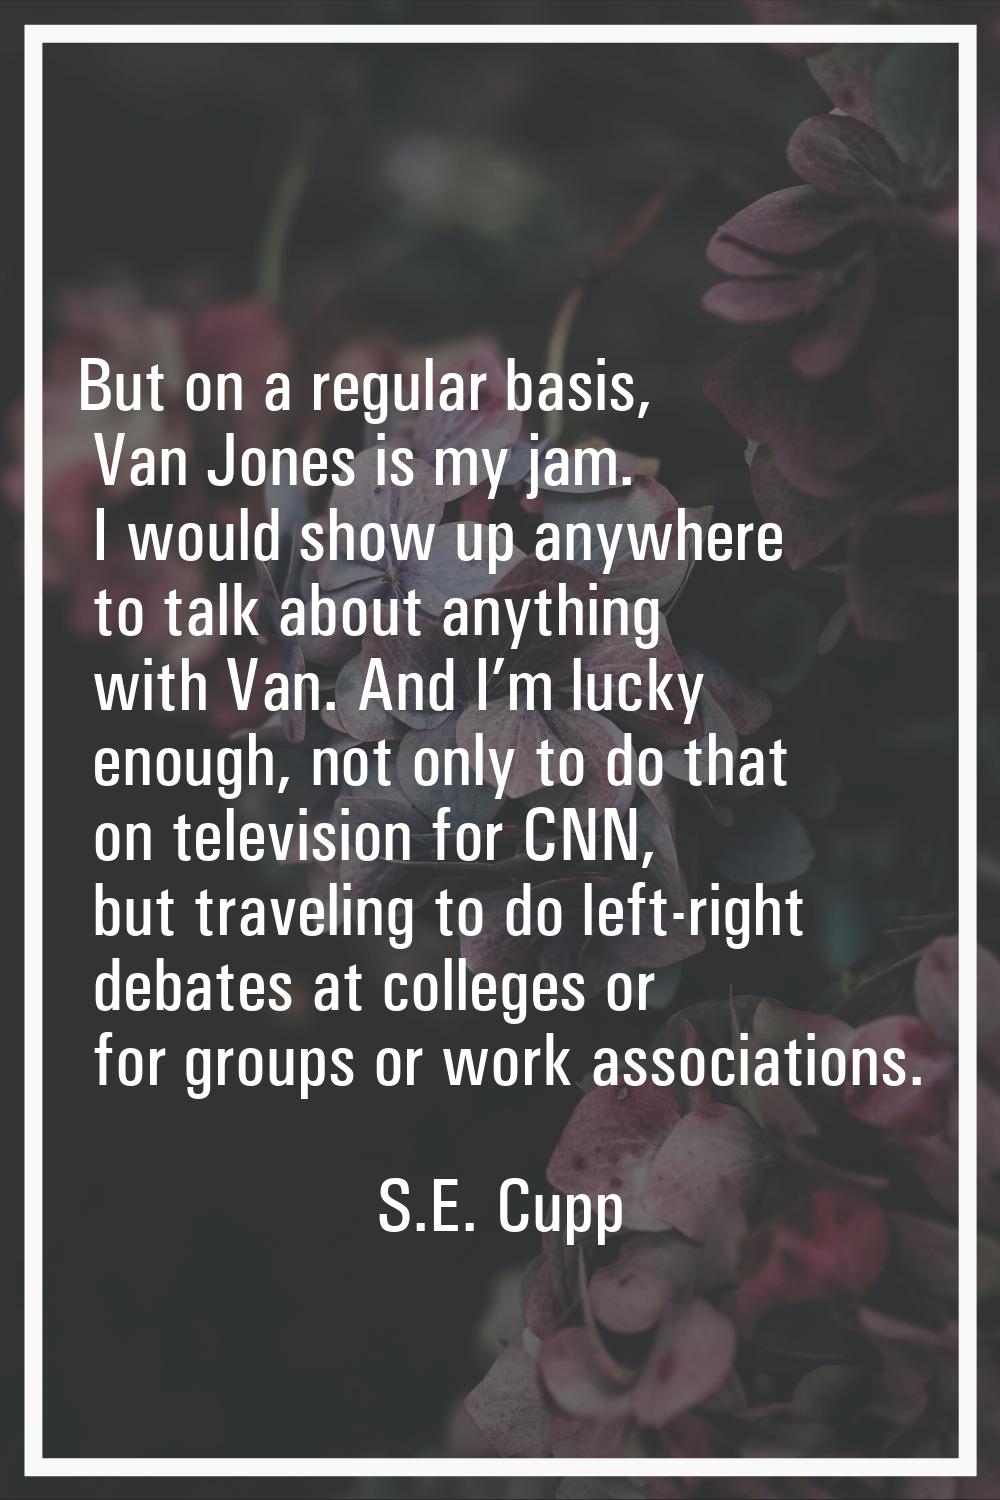 But on a regular basis, Van Jones is my jam. I would show up anywhere to talk about anything with V